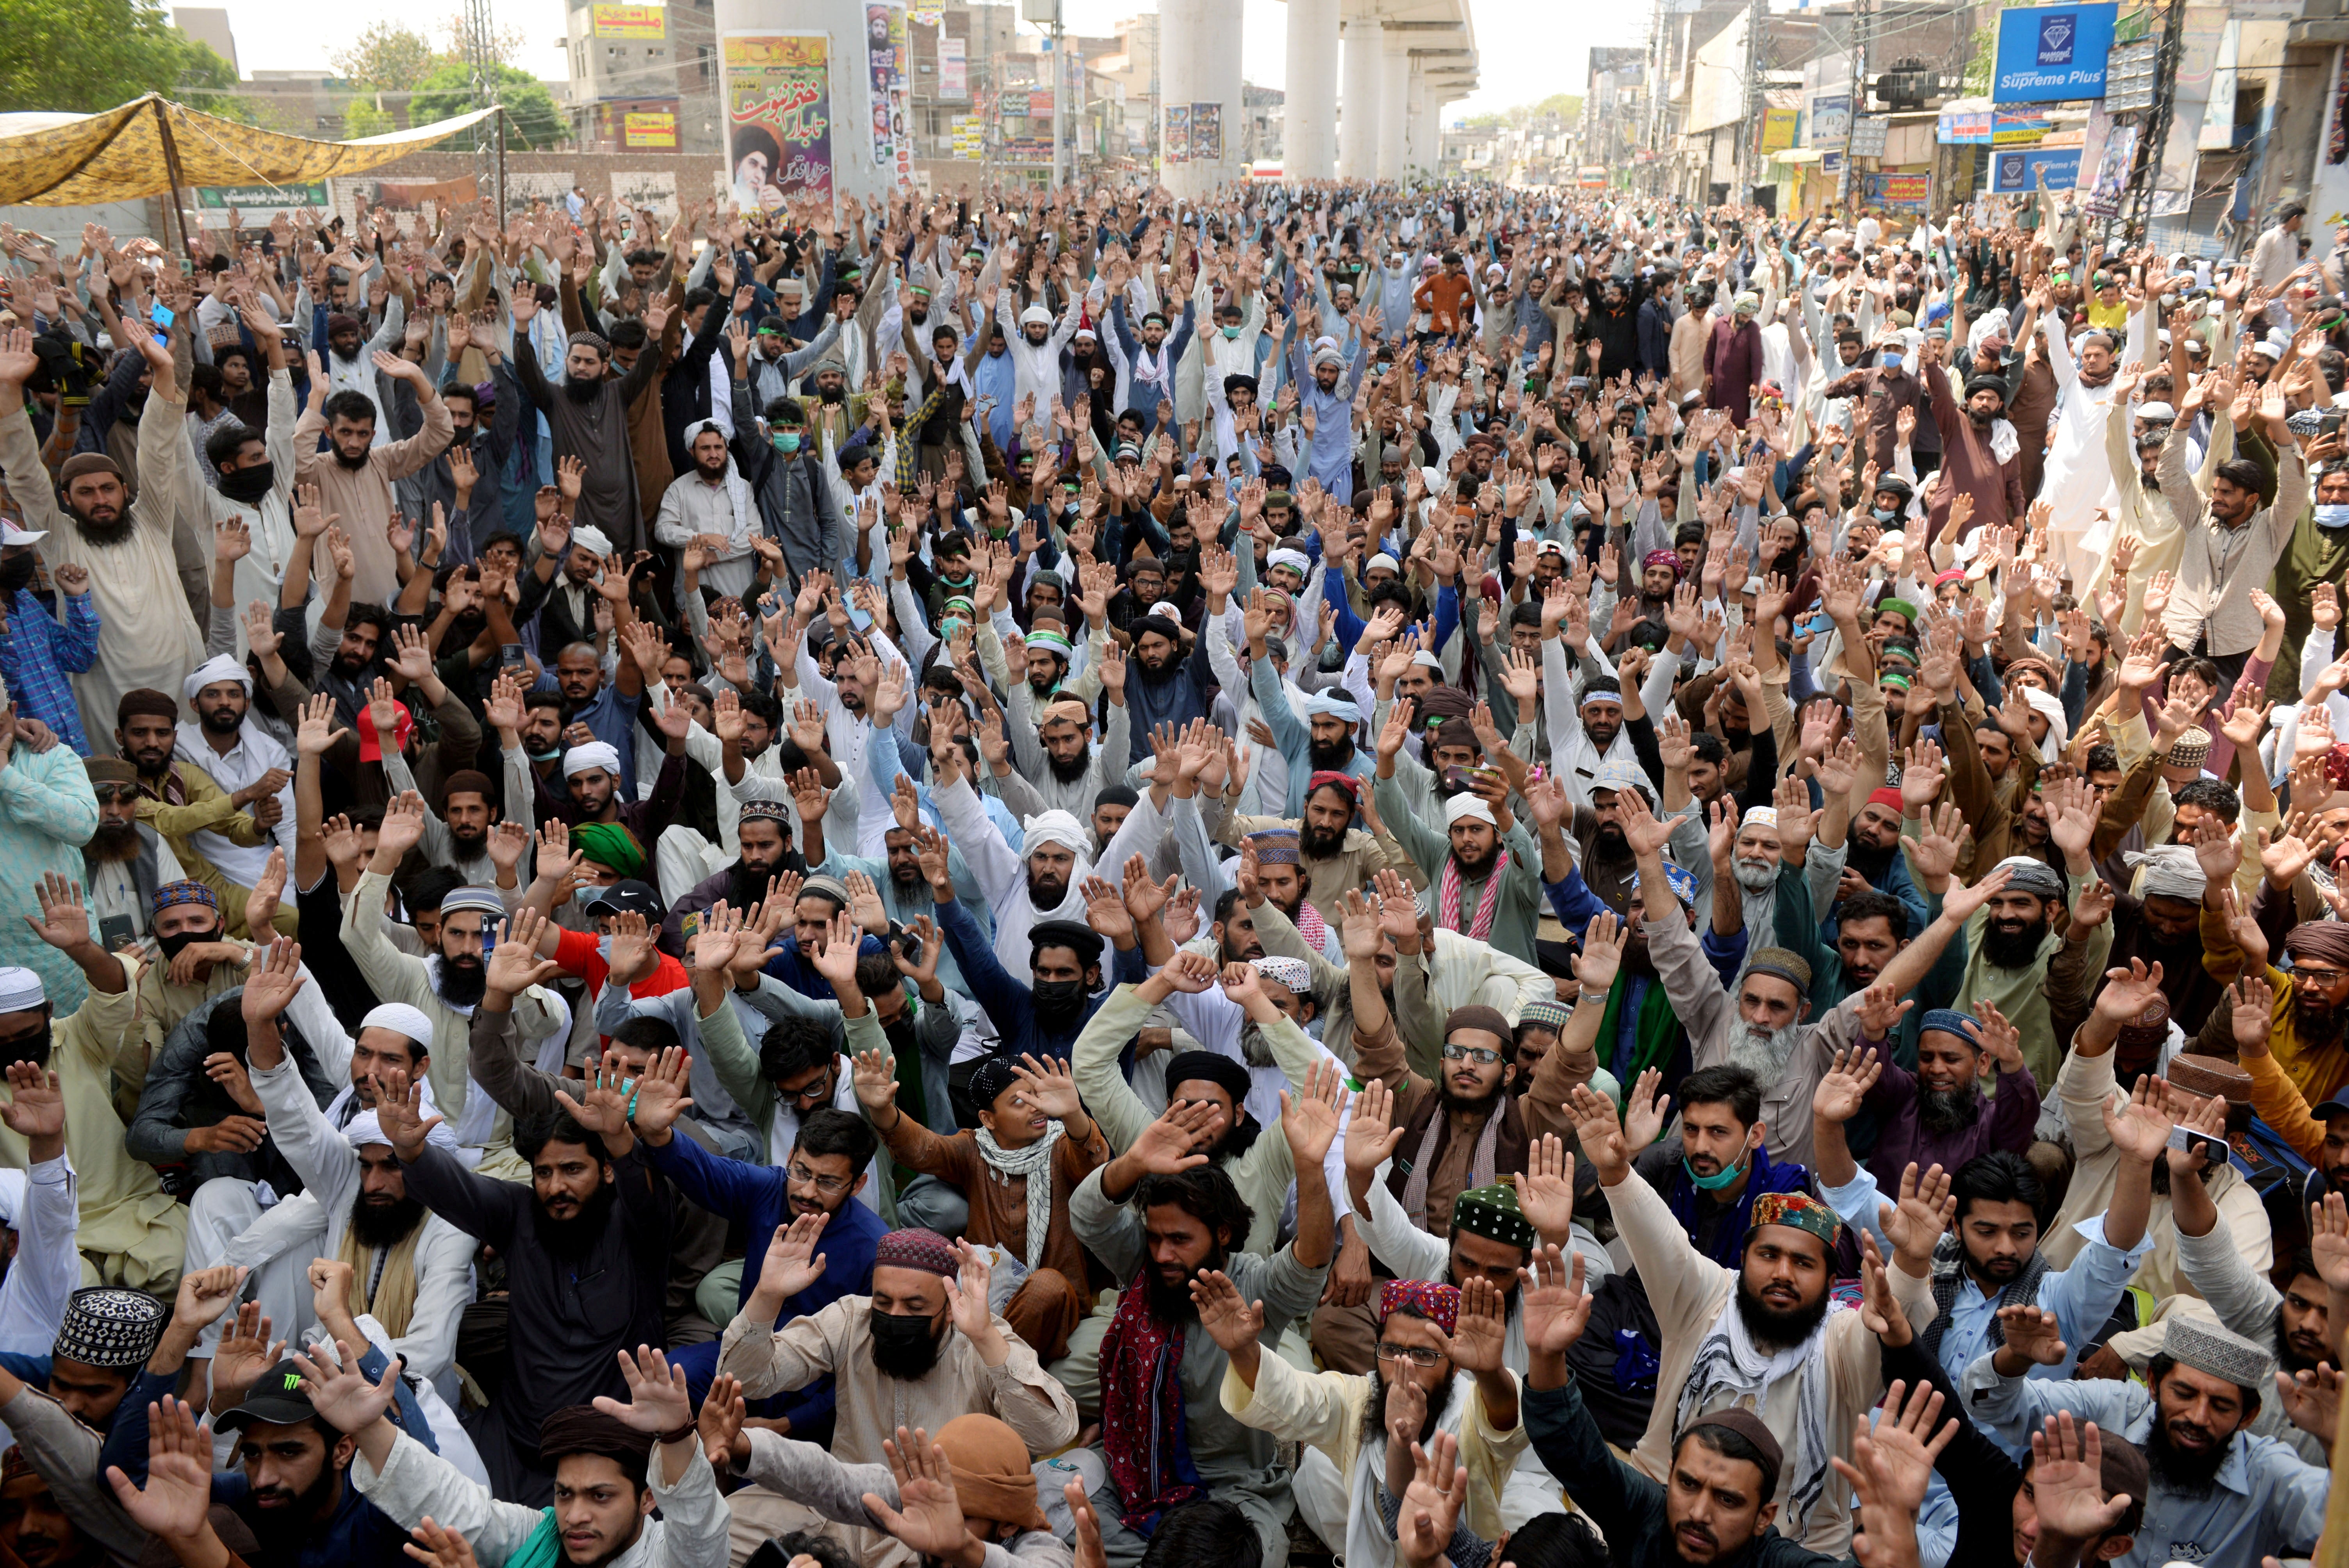 Supporters of the banned Islamist political party Tehrik-e-Labaik Pakistan (TLP) chant slogans during a protest in Lahore